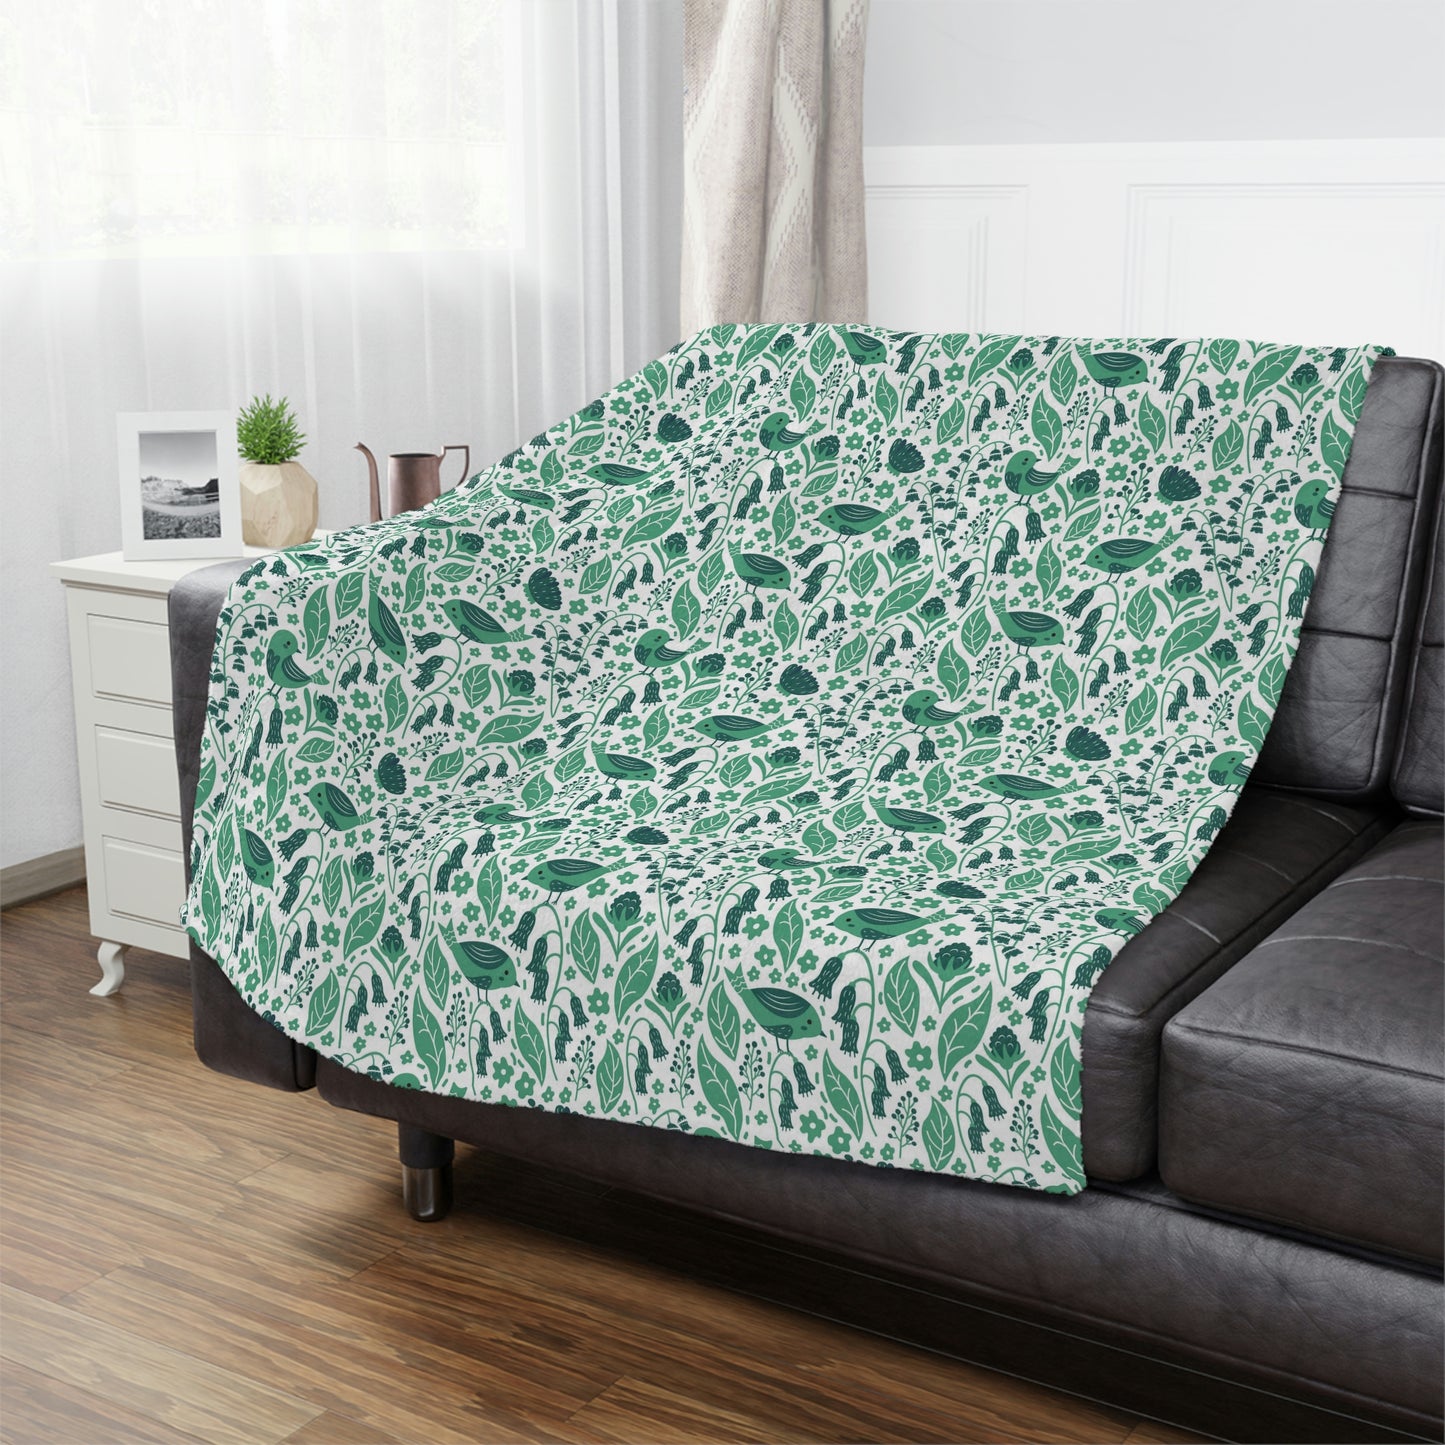 green plush throw blanket lying on a bed, floral bird blanket used in bedroom decor, green accent blanket for couch or bed